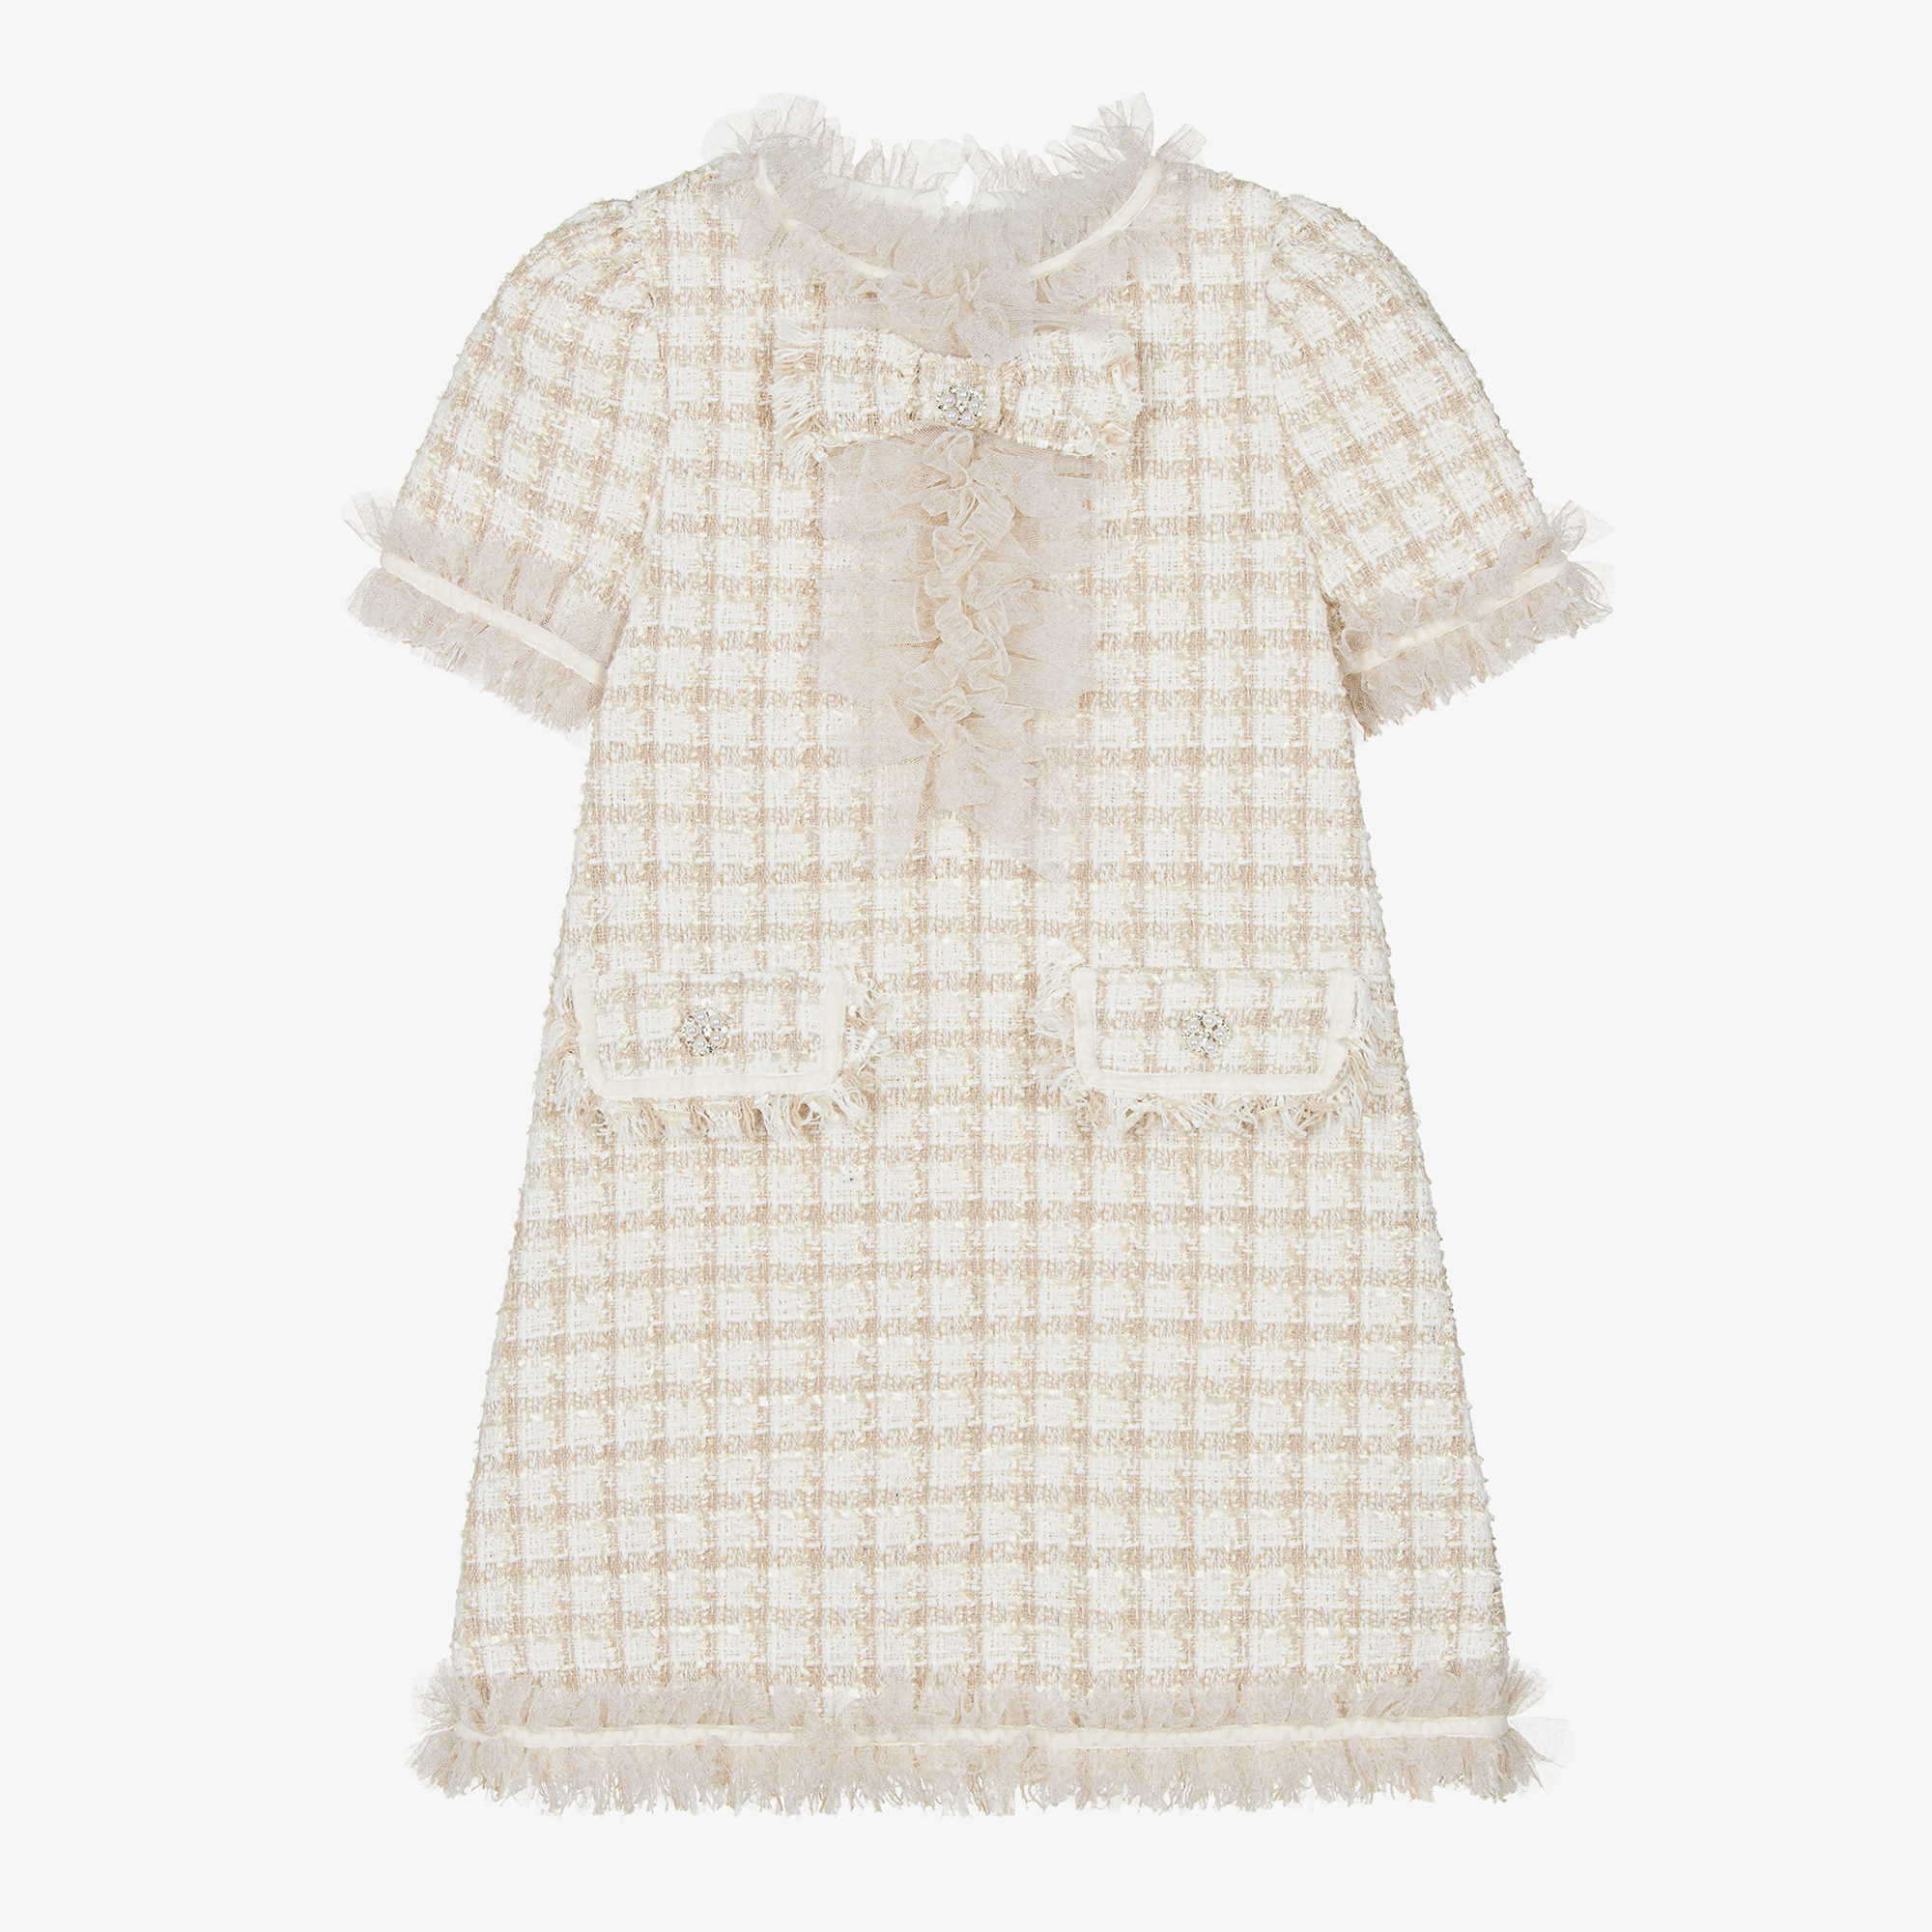 Patachou Ivory Check Dress - Frank and Polly Kids Clothing